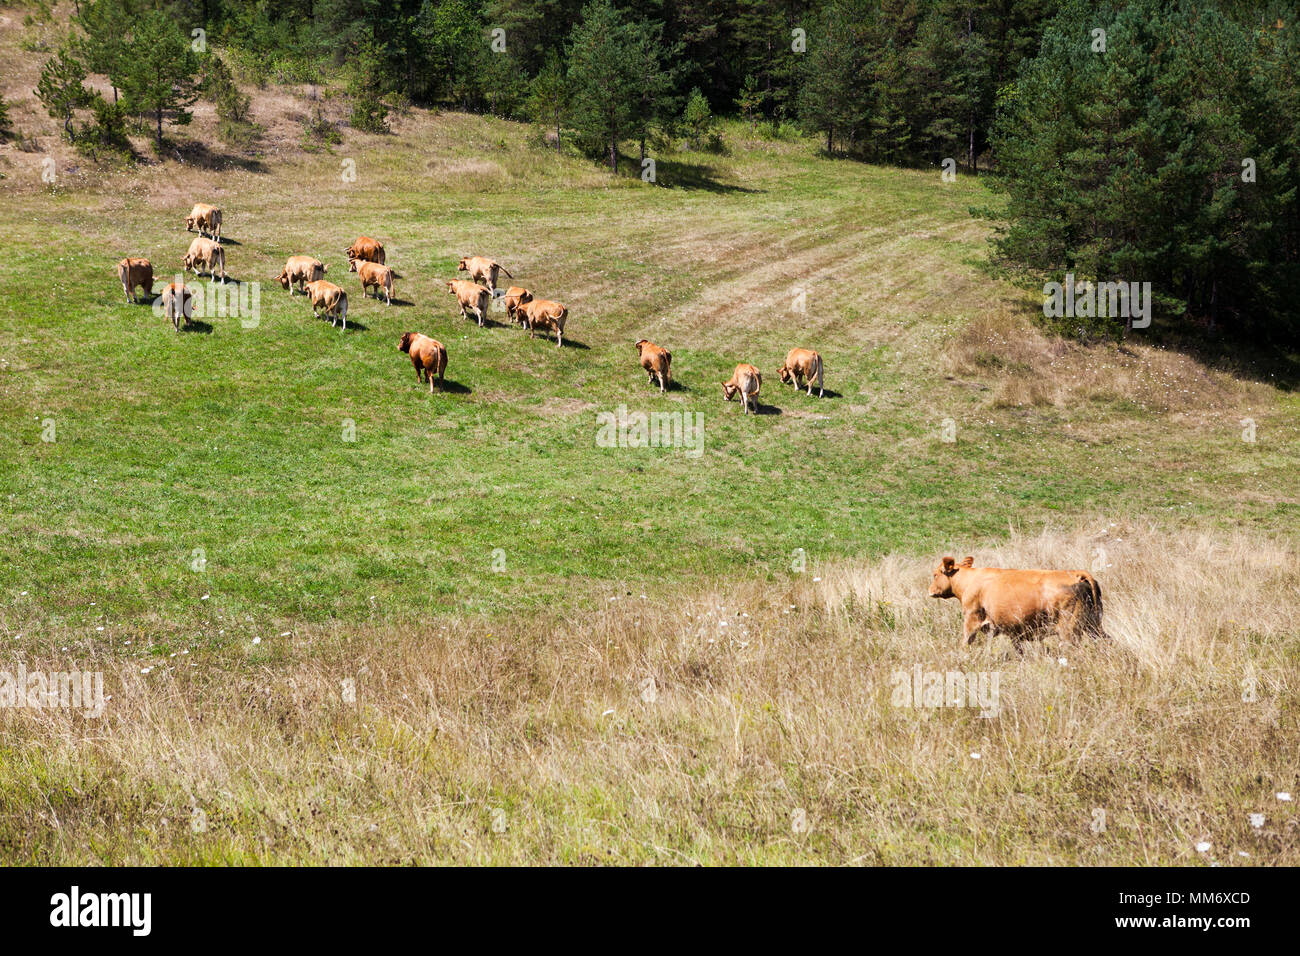 Pictures of a heard of Limousin cattle going up a hilly field in Limousin, France. Stock Photo